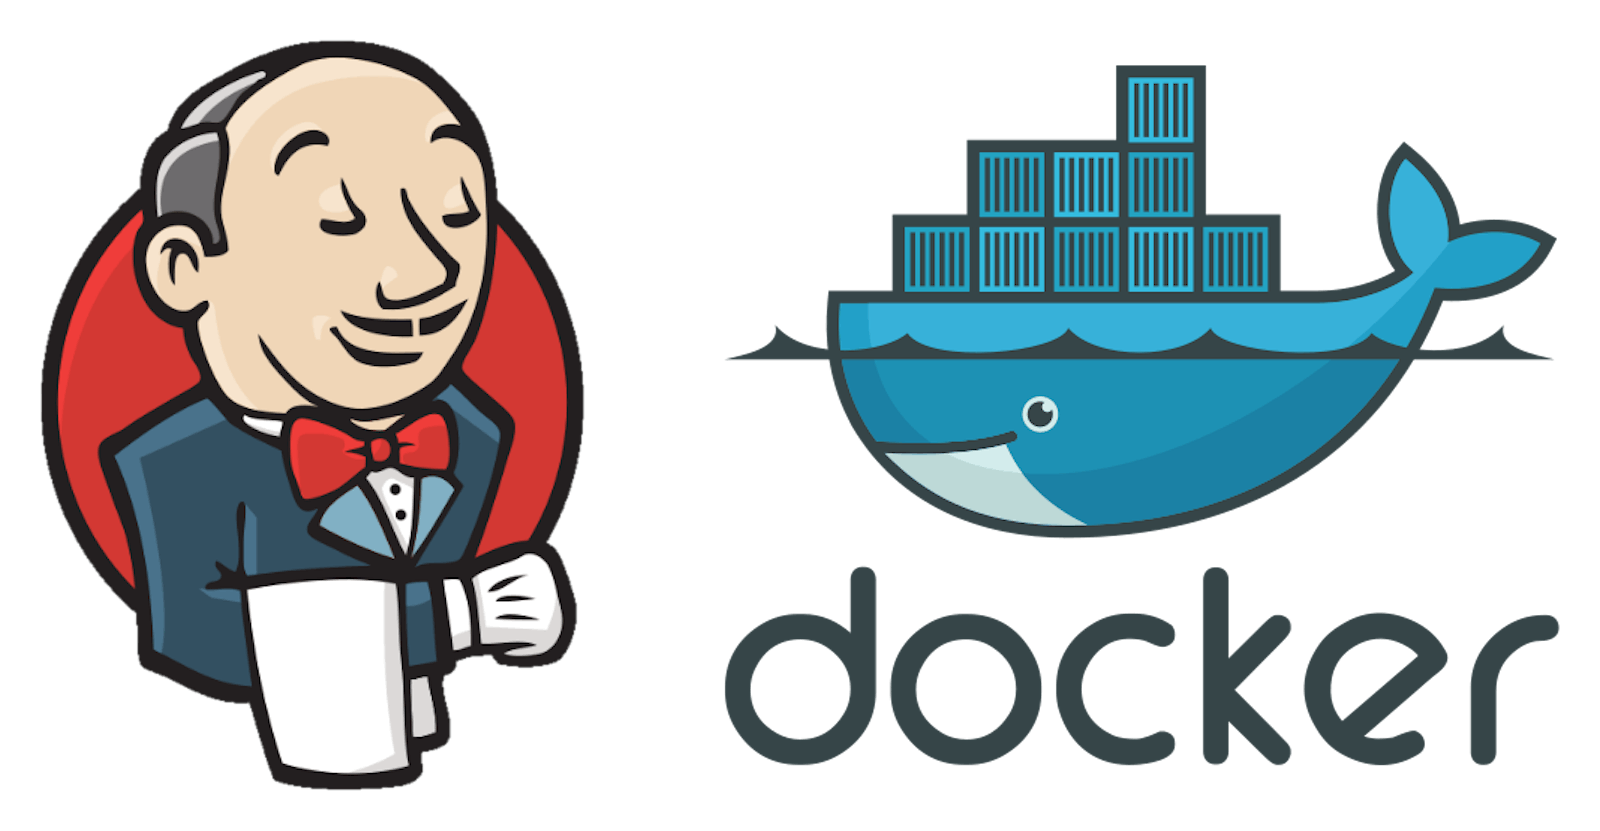 DevSecOps: Deploying the 2048 Game on Docker
with Jenkins CI/CD